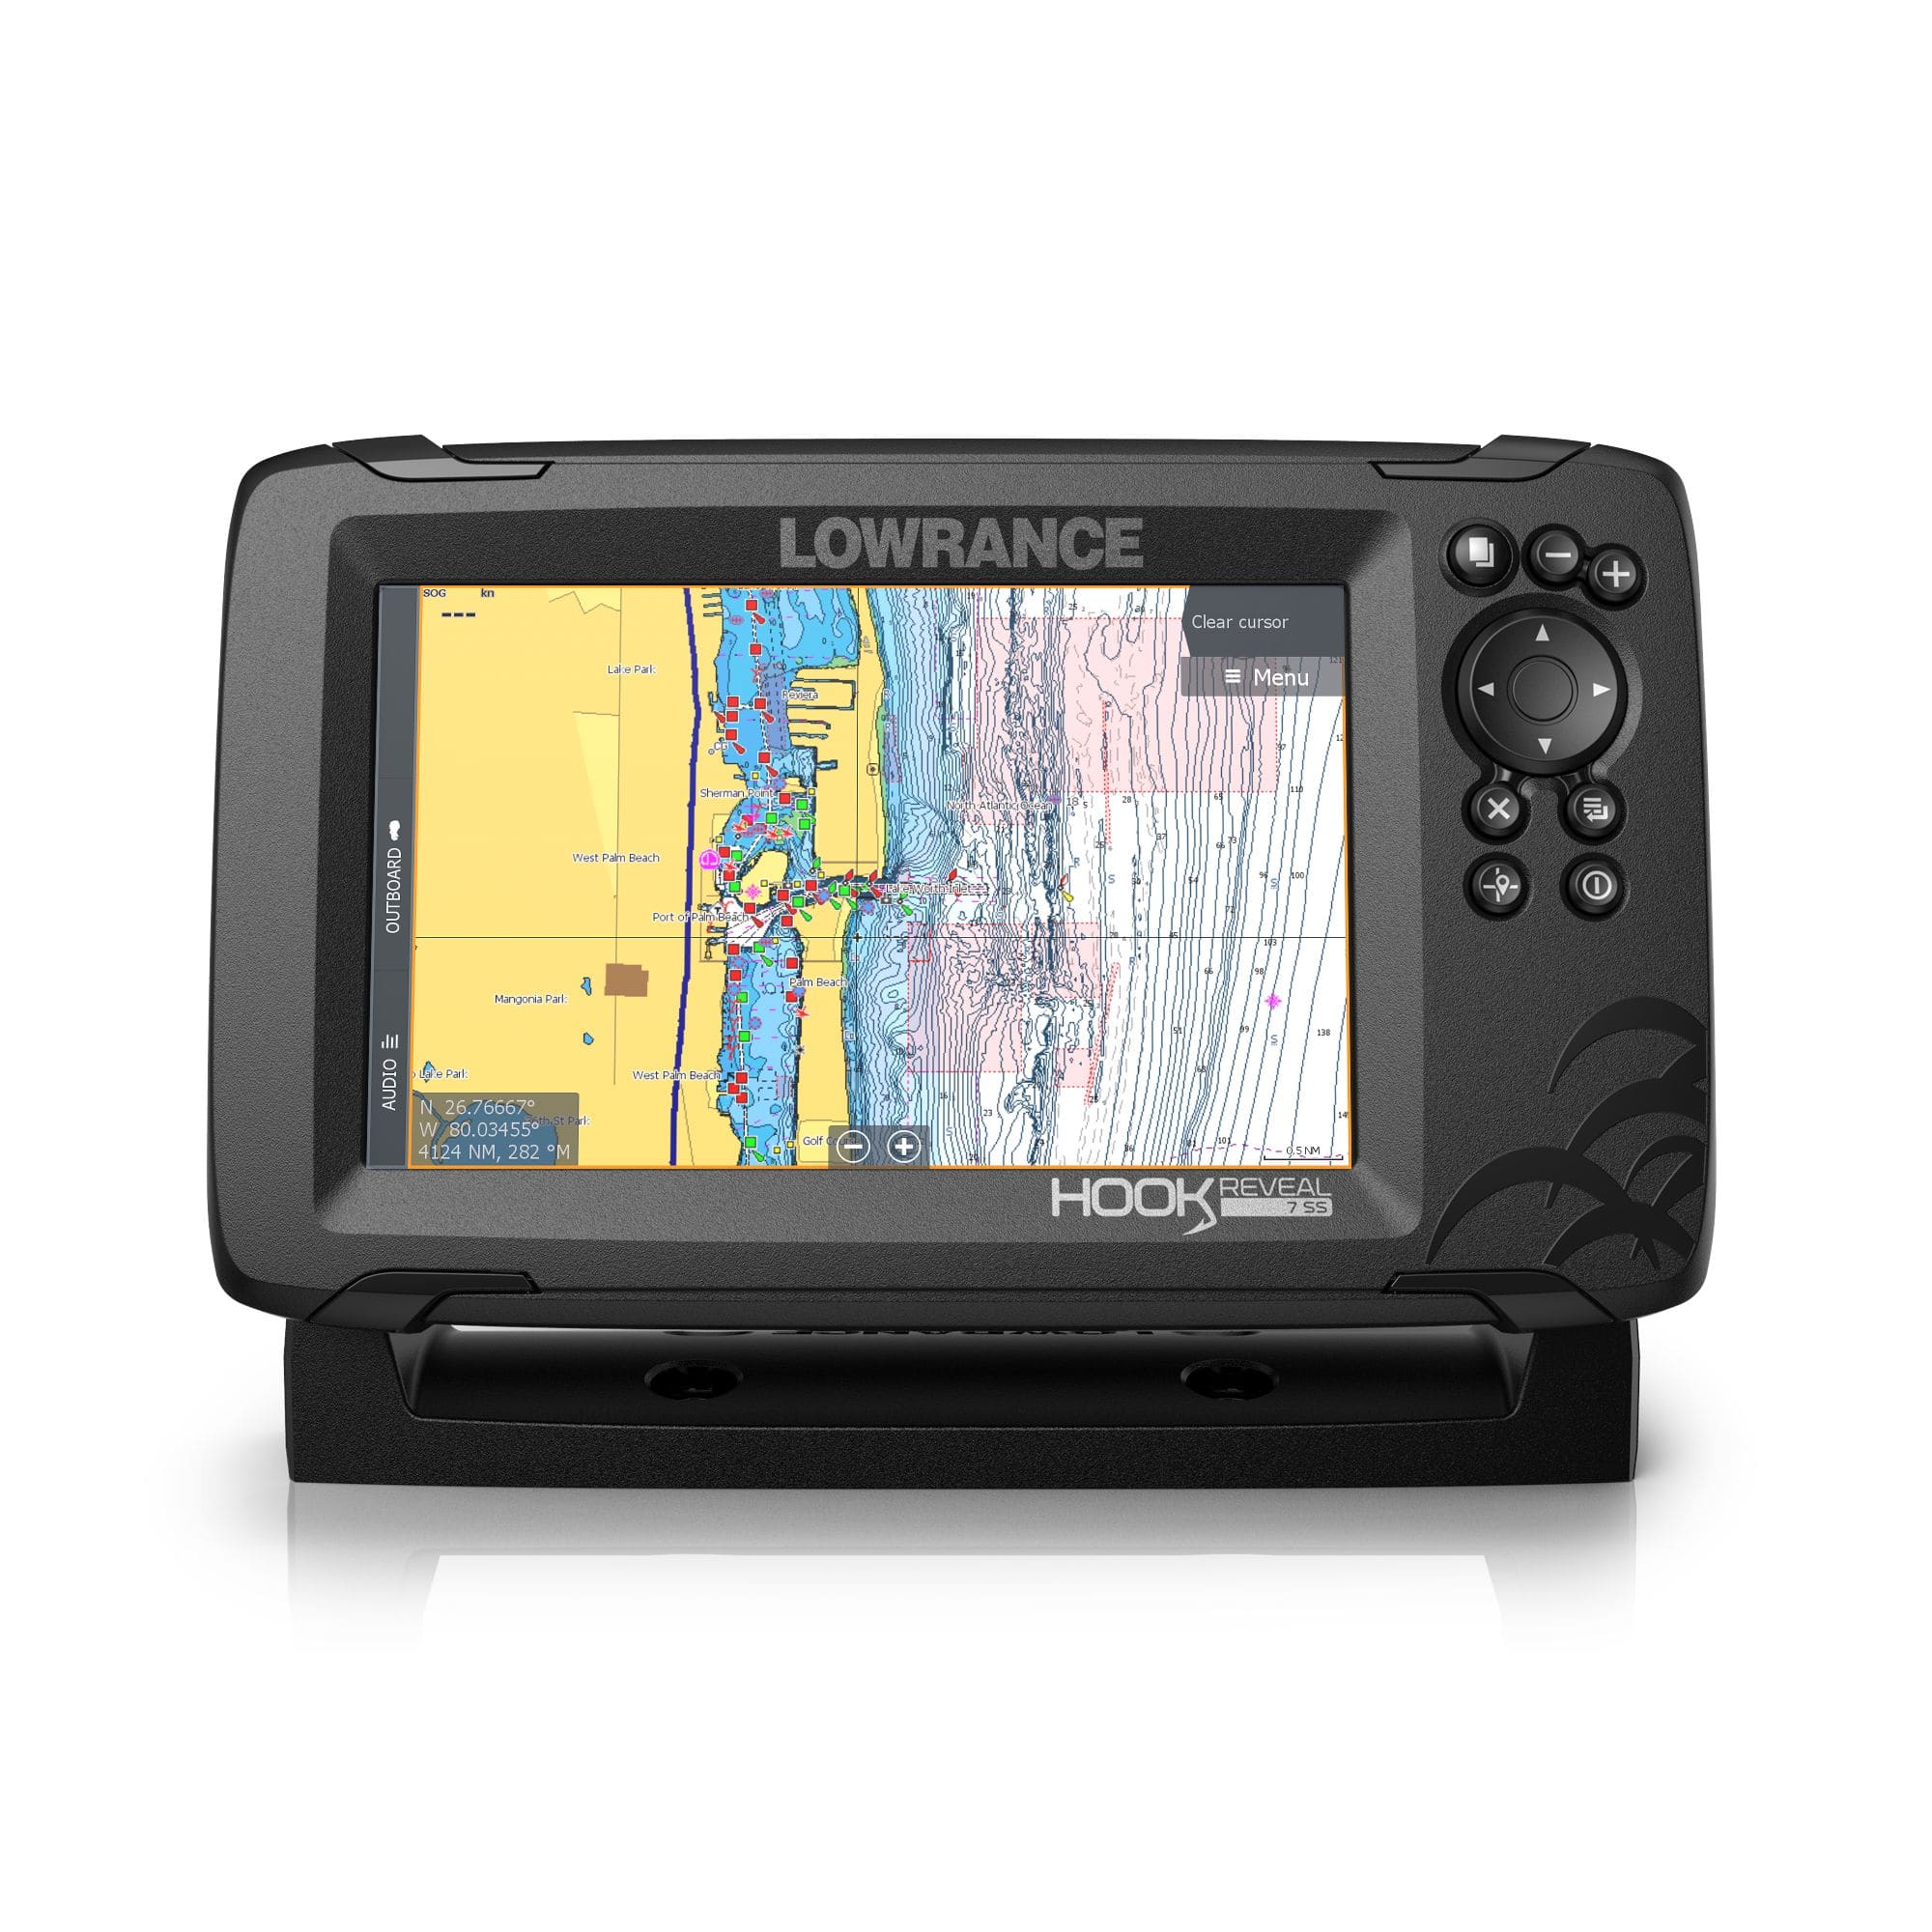 https://media-www.canadiantire.ca/product/playing/fishing/fishing-equipment/1785255/lowrance-hook-reveal-7-splitshot-with-c-map-discover-863e982e-164f-45c6-b646-18b4a25c032e-jpgrendition.jpg